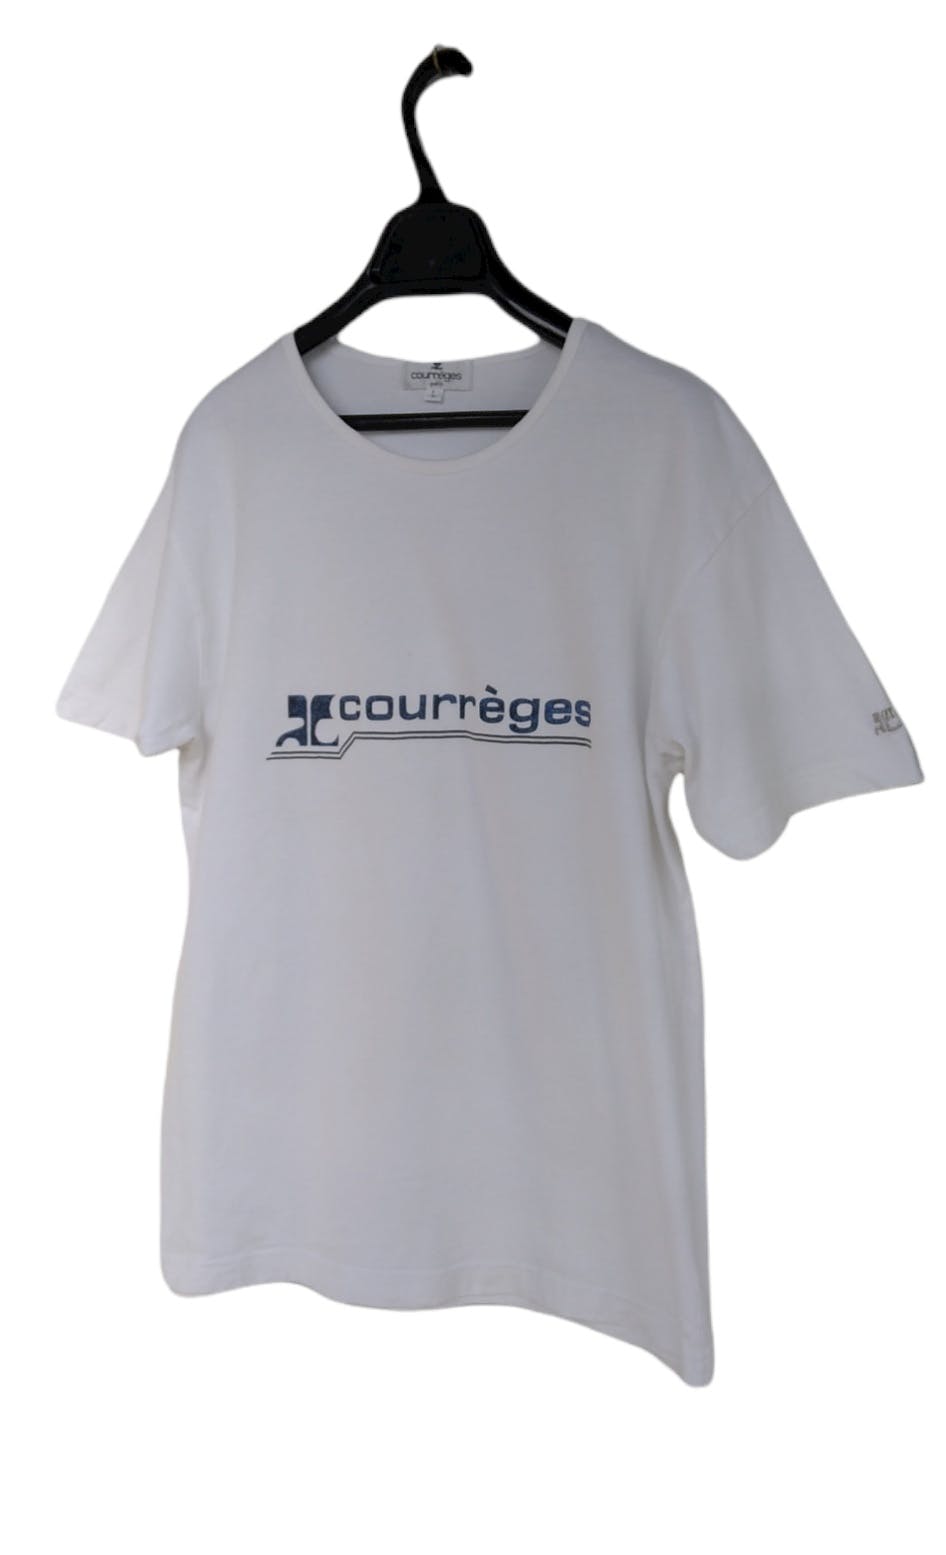 Vintage Courreges Spell Out Logo White Tee - 2